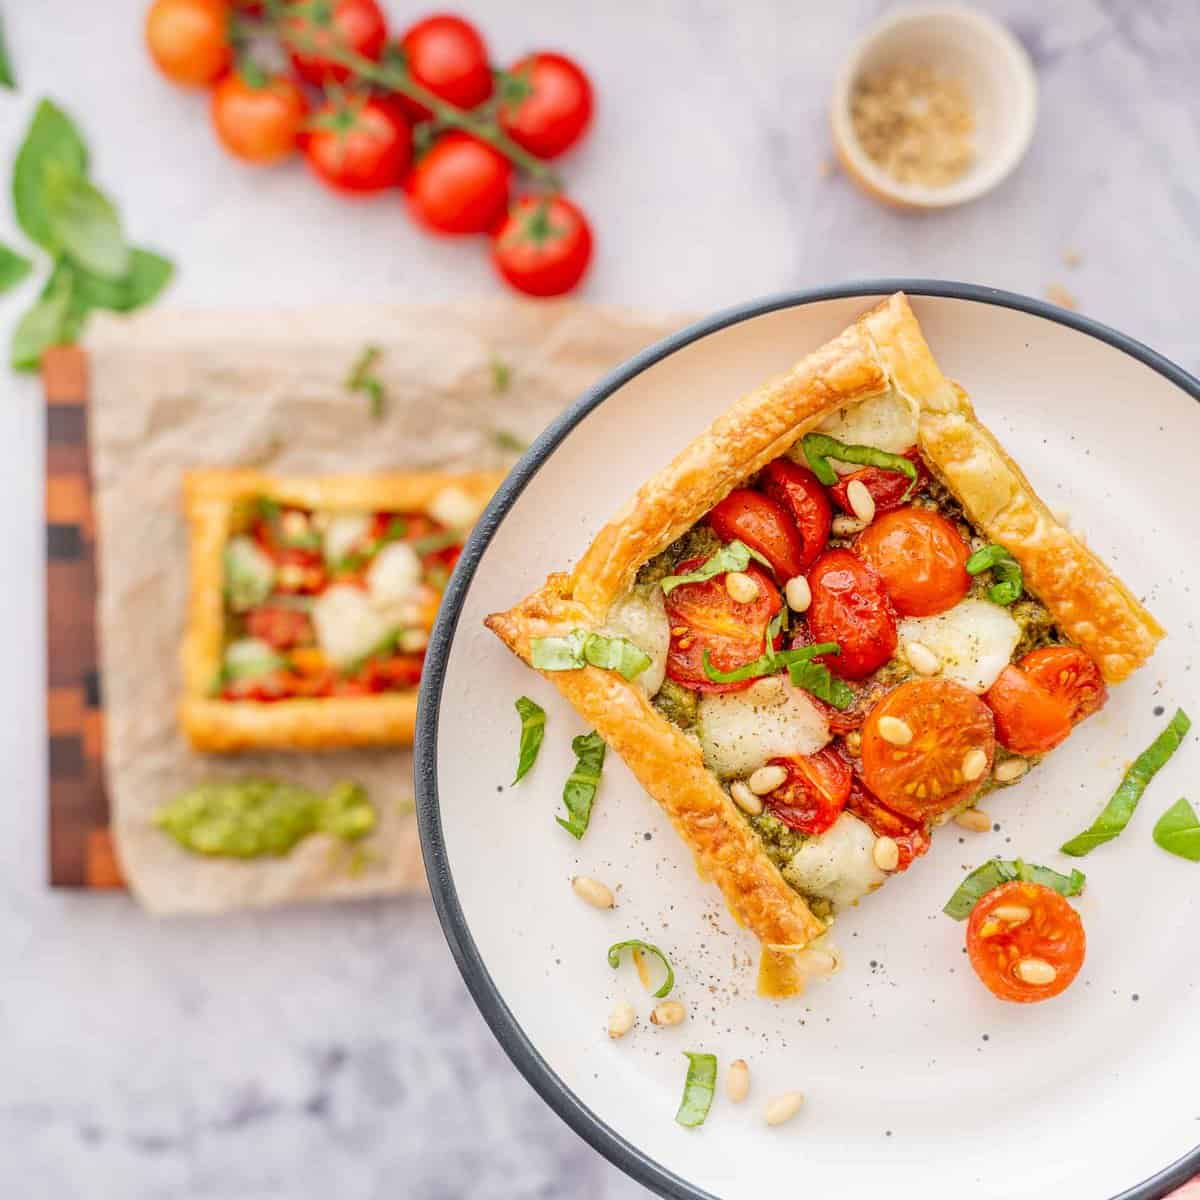 One slice of Tomato tart on a plate raised above the bench  full of ingredients below.